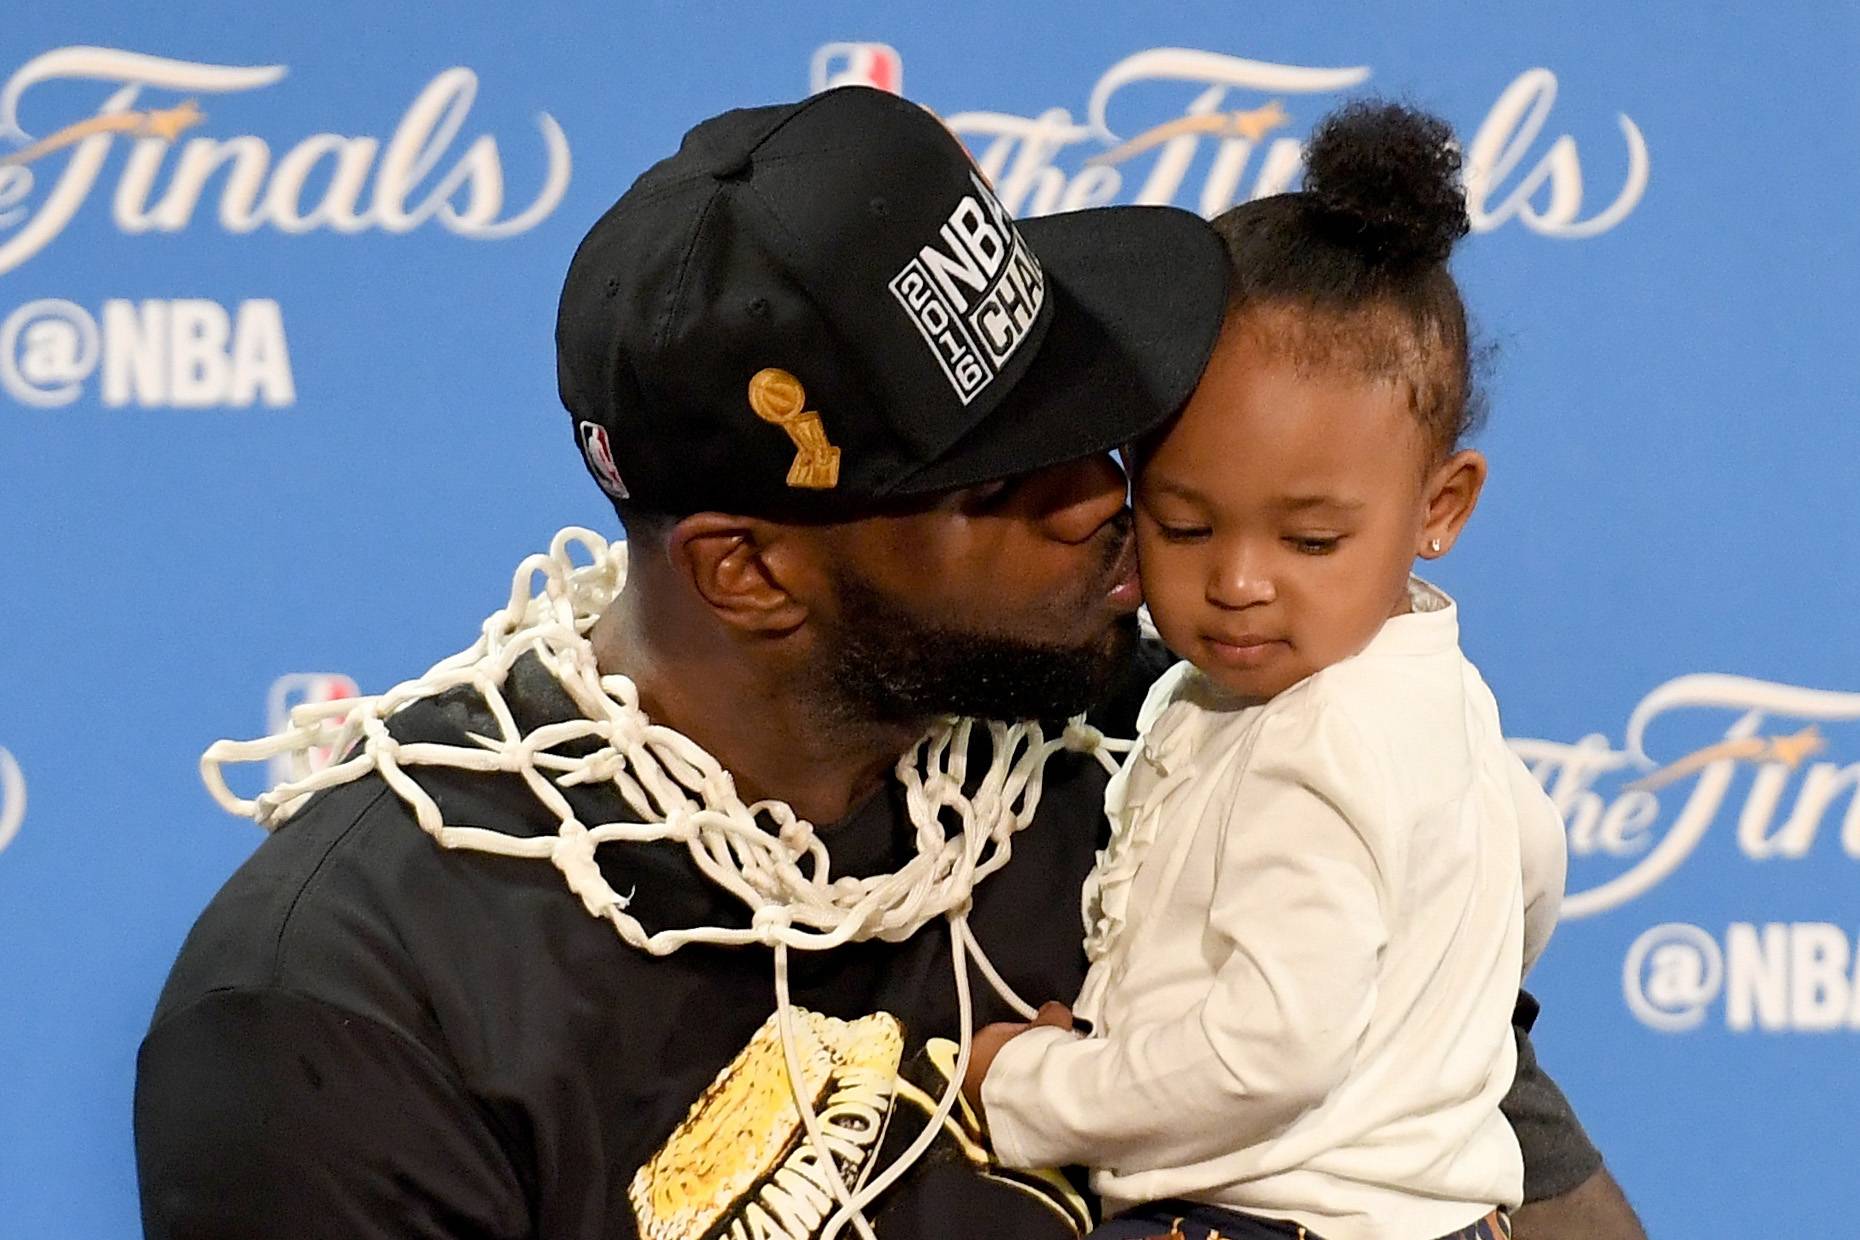 Lebron James - Lebron makes sure to support his sons with their basketball dreams. It’s not just about him on his kids’ court!(Photo:&nbsp;Thearon W. Henderson/Getty Images)&nbsp;